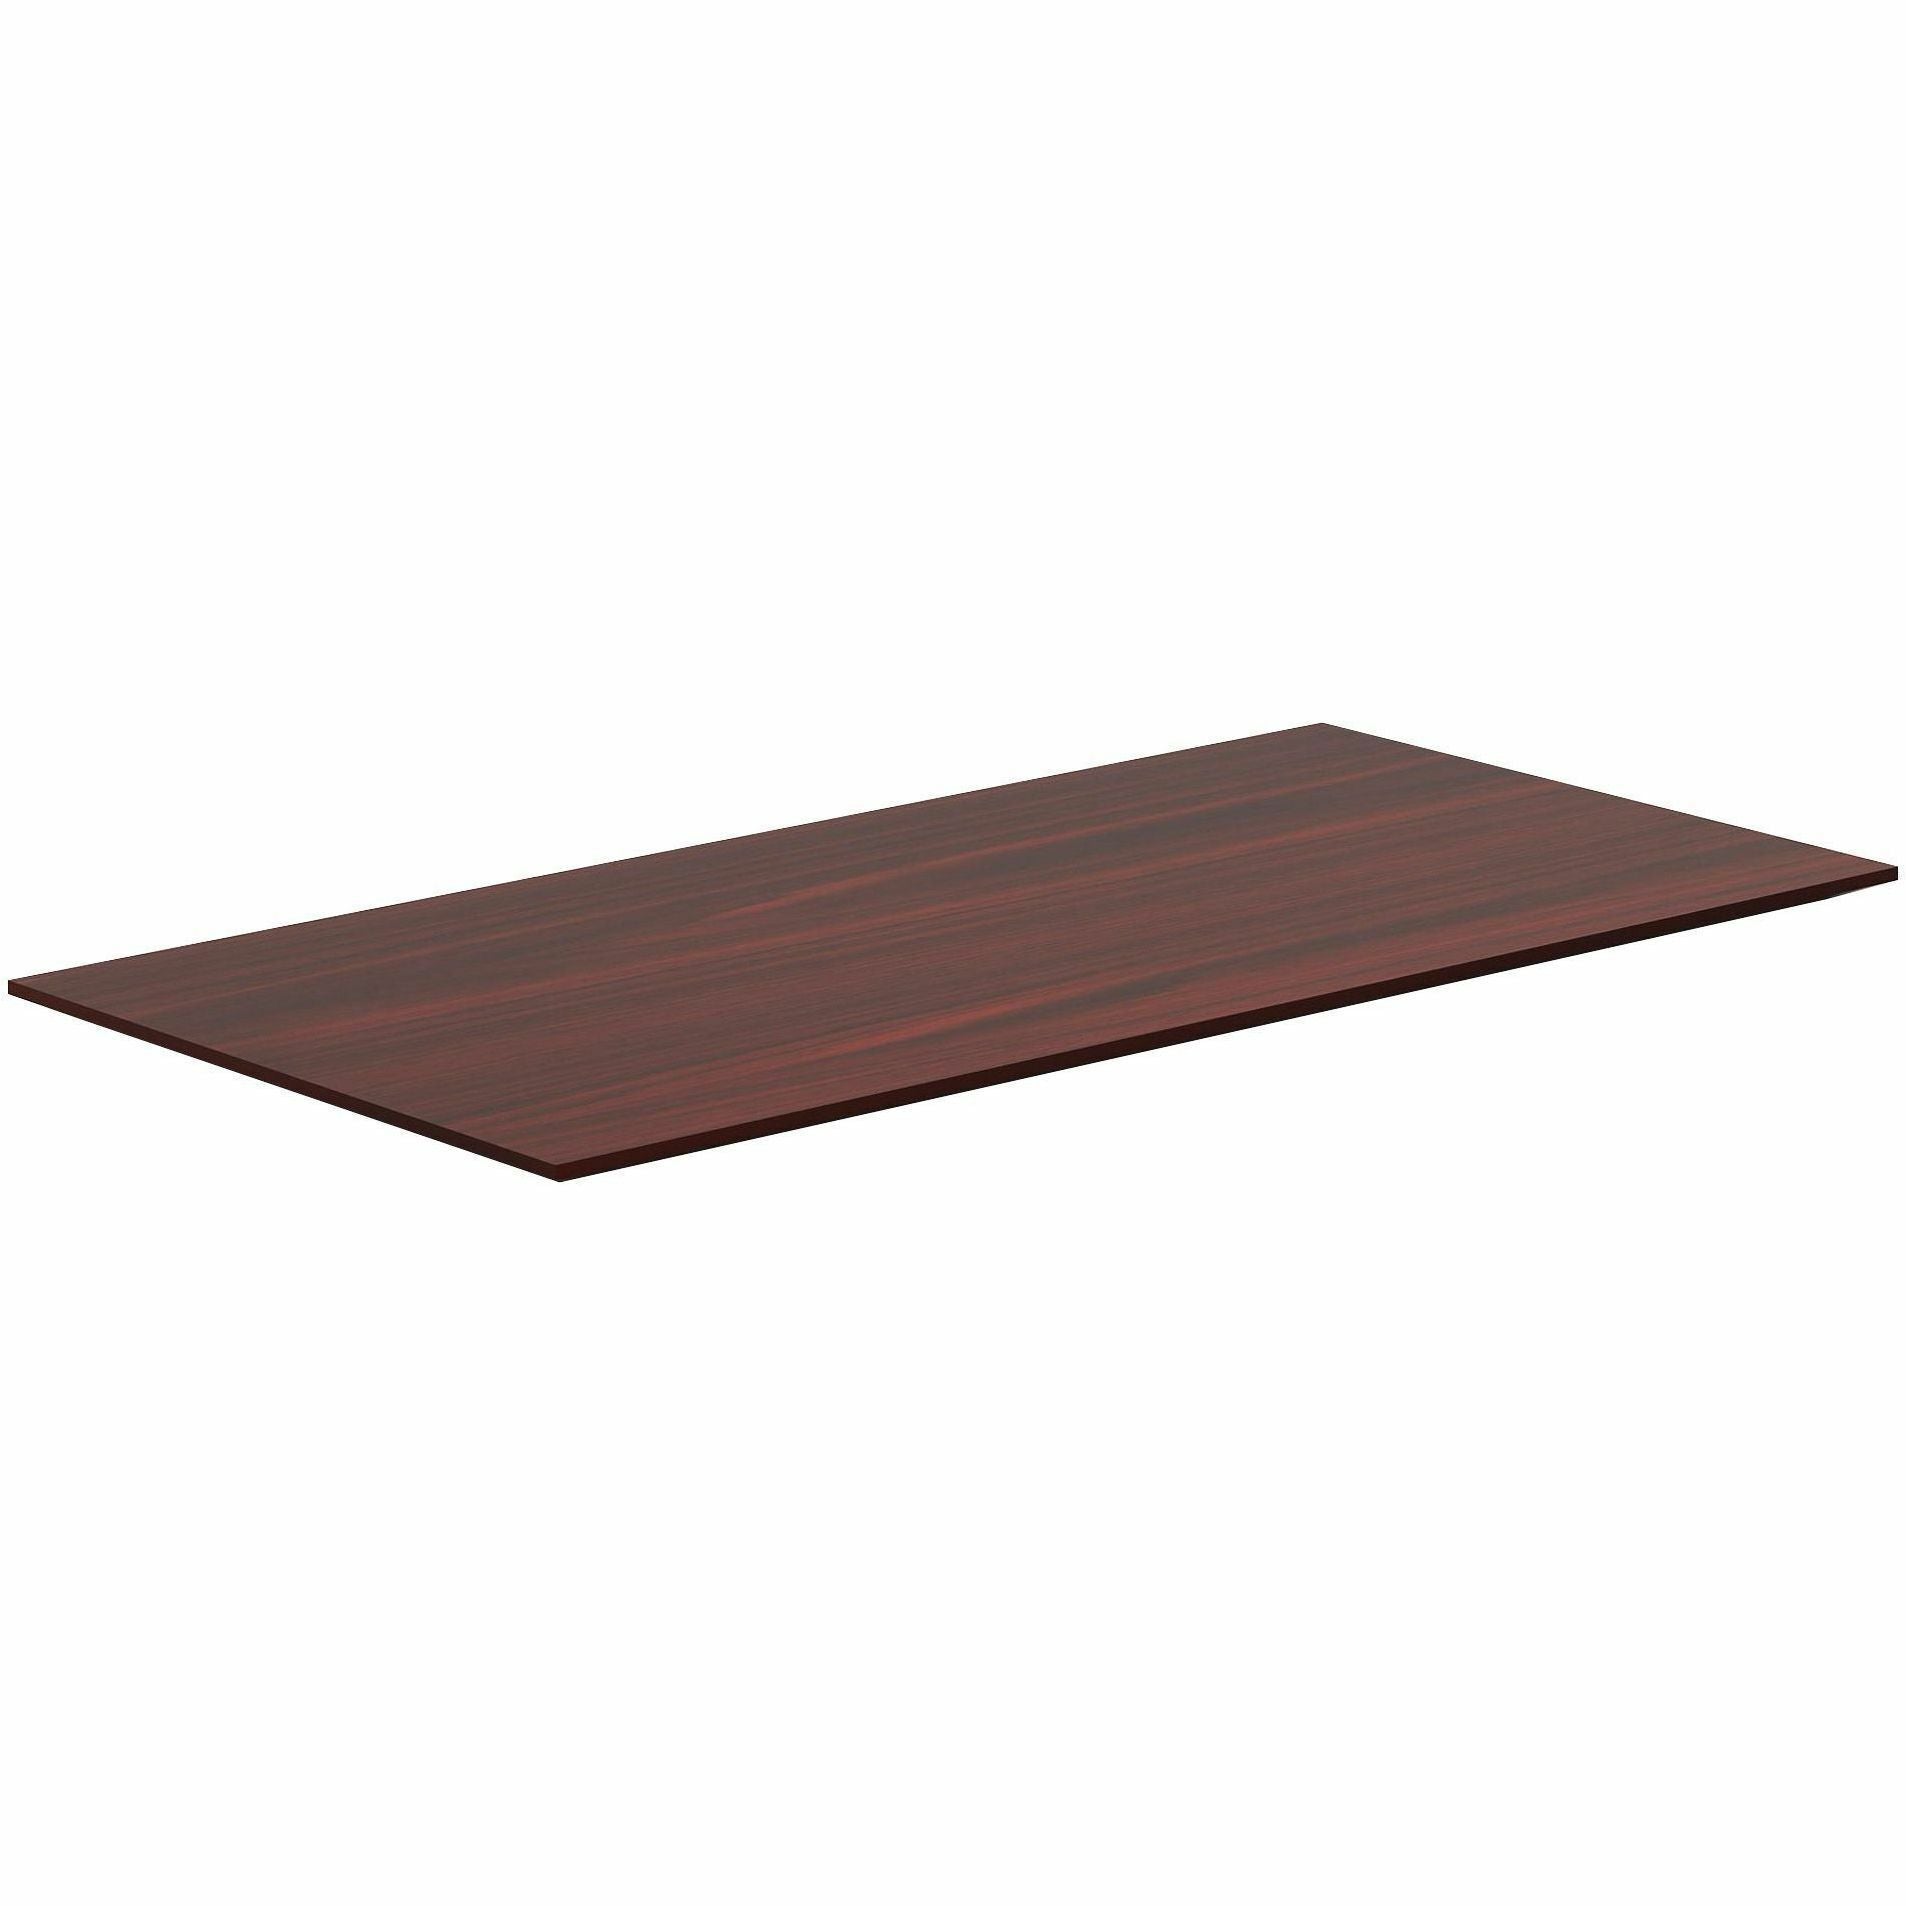 Lorell Relevance Series Tabletop - For - Table TopLaminated Rectangle, Mahogany Top x 48" Table Top Width x 24" Table Top Depth x 1" Table Top Thickness x 47.63" Width x 23.63" Depth - Assembly Required - 1 Each - 